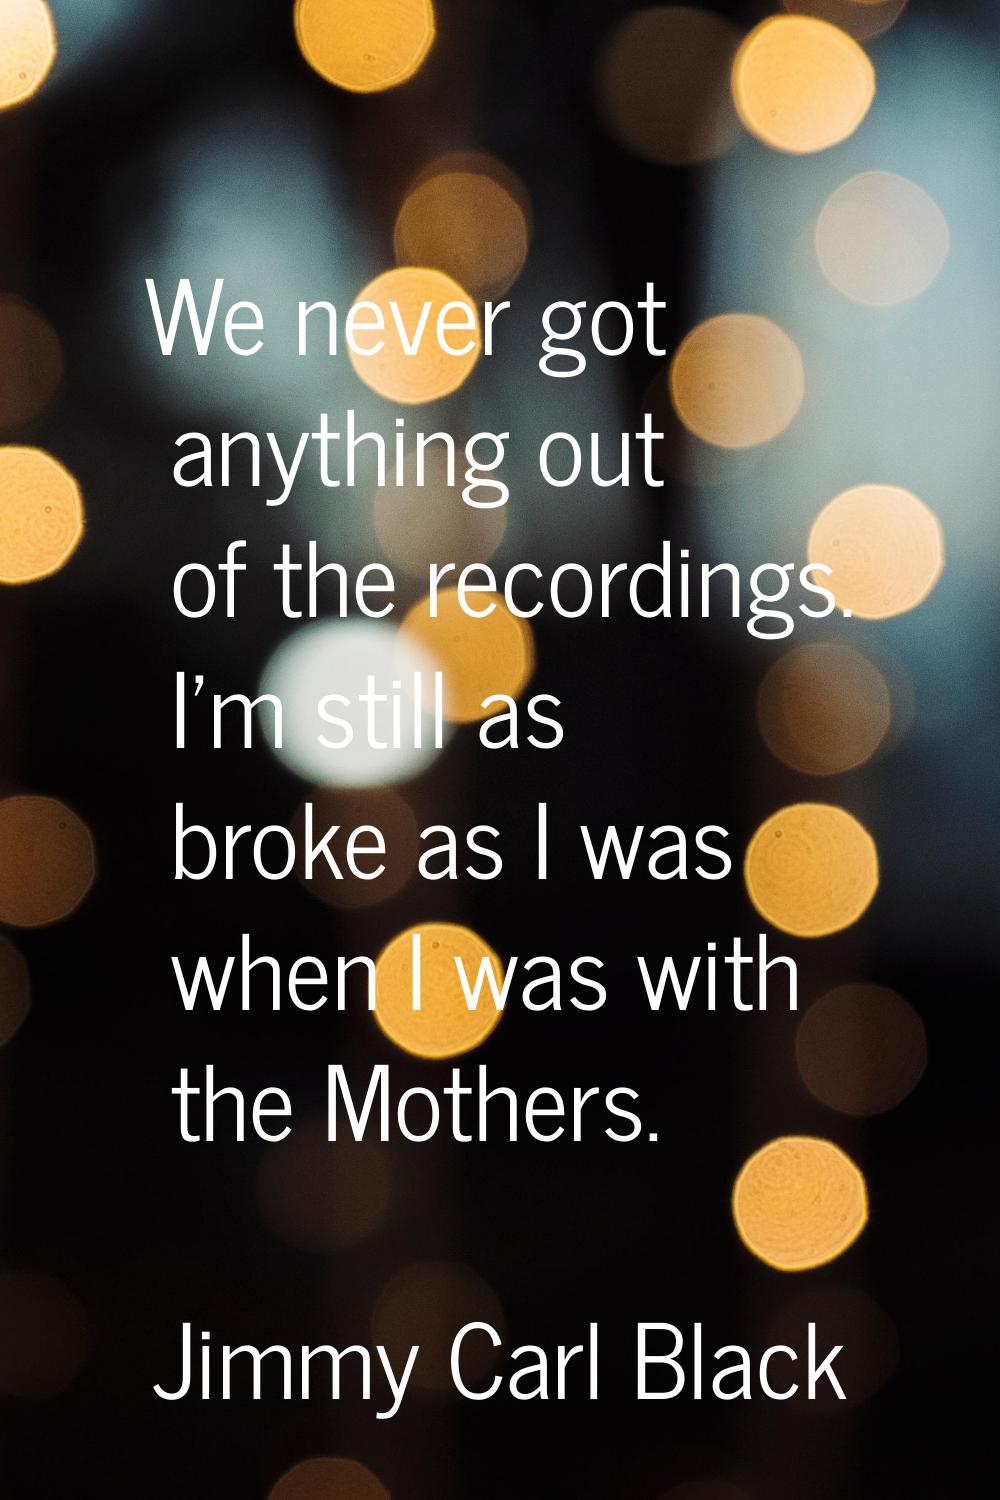 We never got anything out of the recordings. I'm still as broke as I was when I was with the Mother